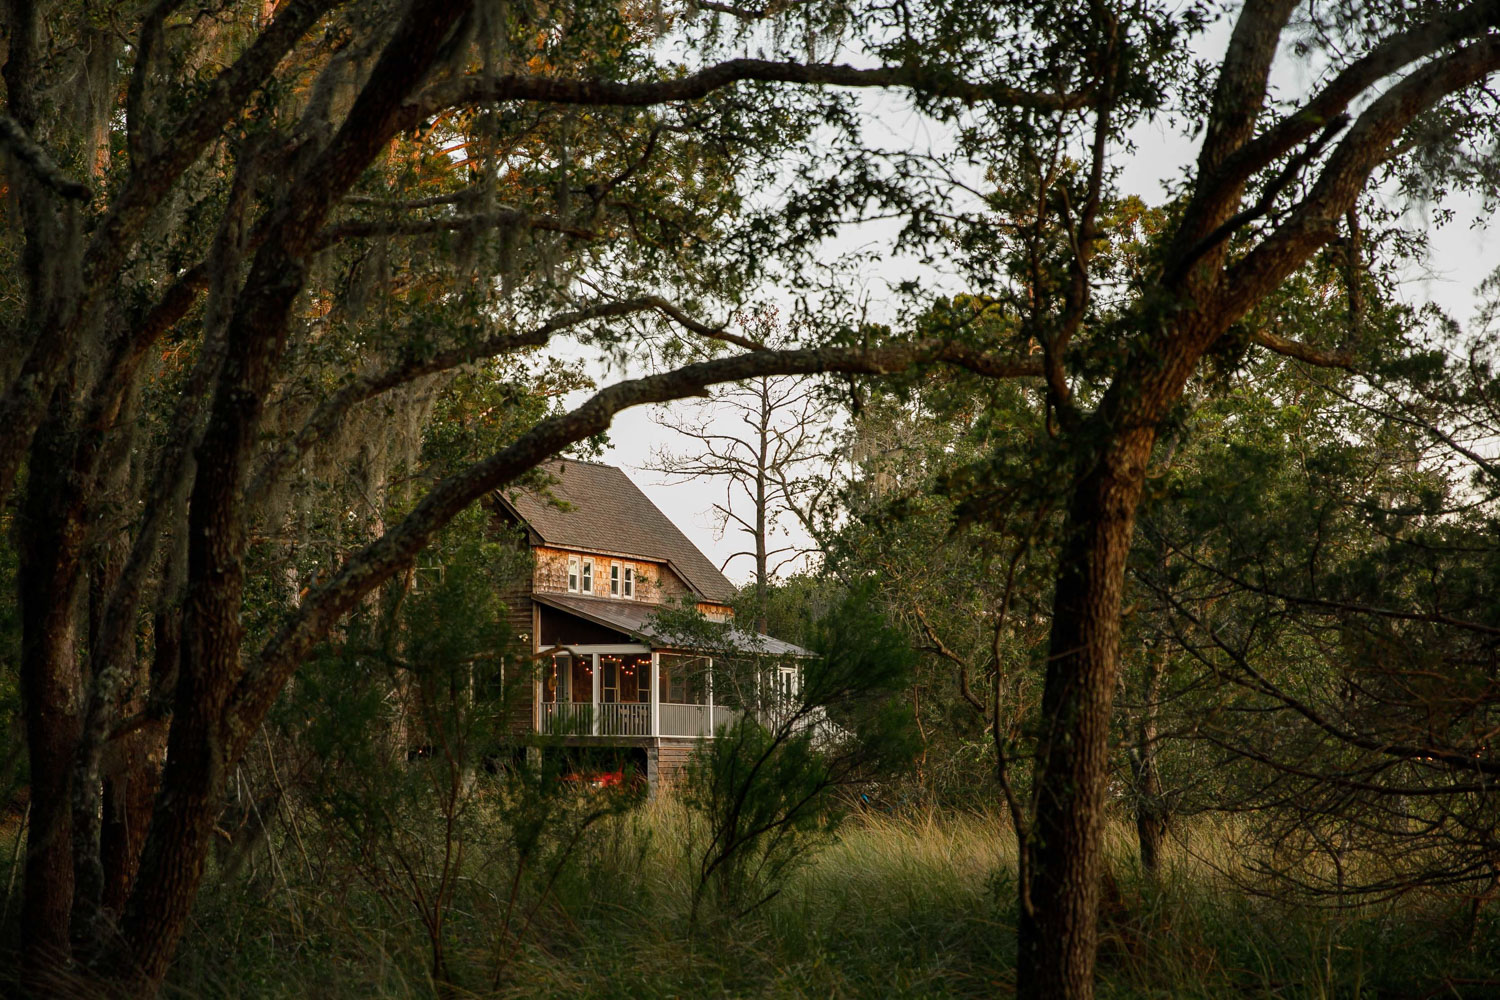   “Even Michelle Jewell is surprised that she fell in love with the marshlands that back up to her home in Wadmalaw Island, South Carolina. The island, a 10-by-6-mile haven just south of Charleston, is quieter than its neighbors, Johns and Kiawah isl